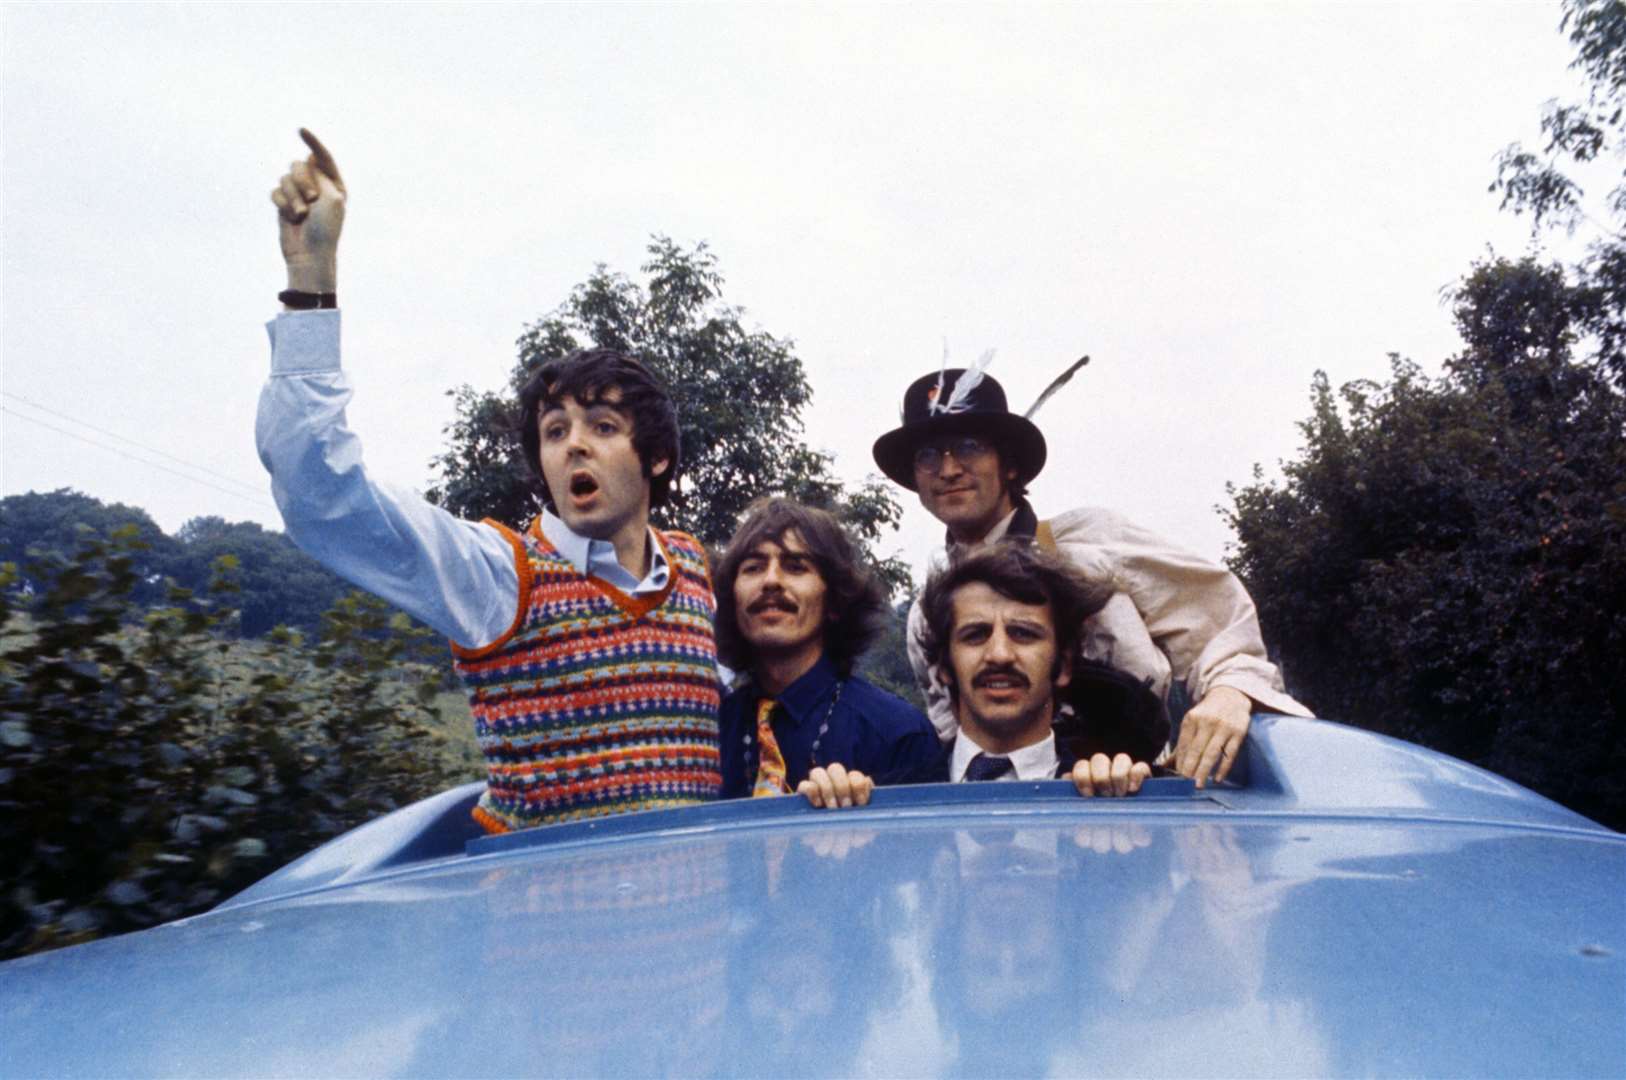 Magical Mystery Tour was filmed in and around West Malling